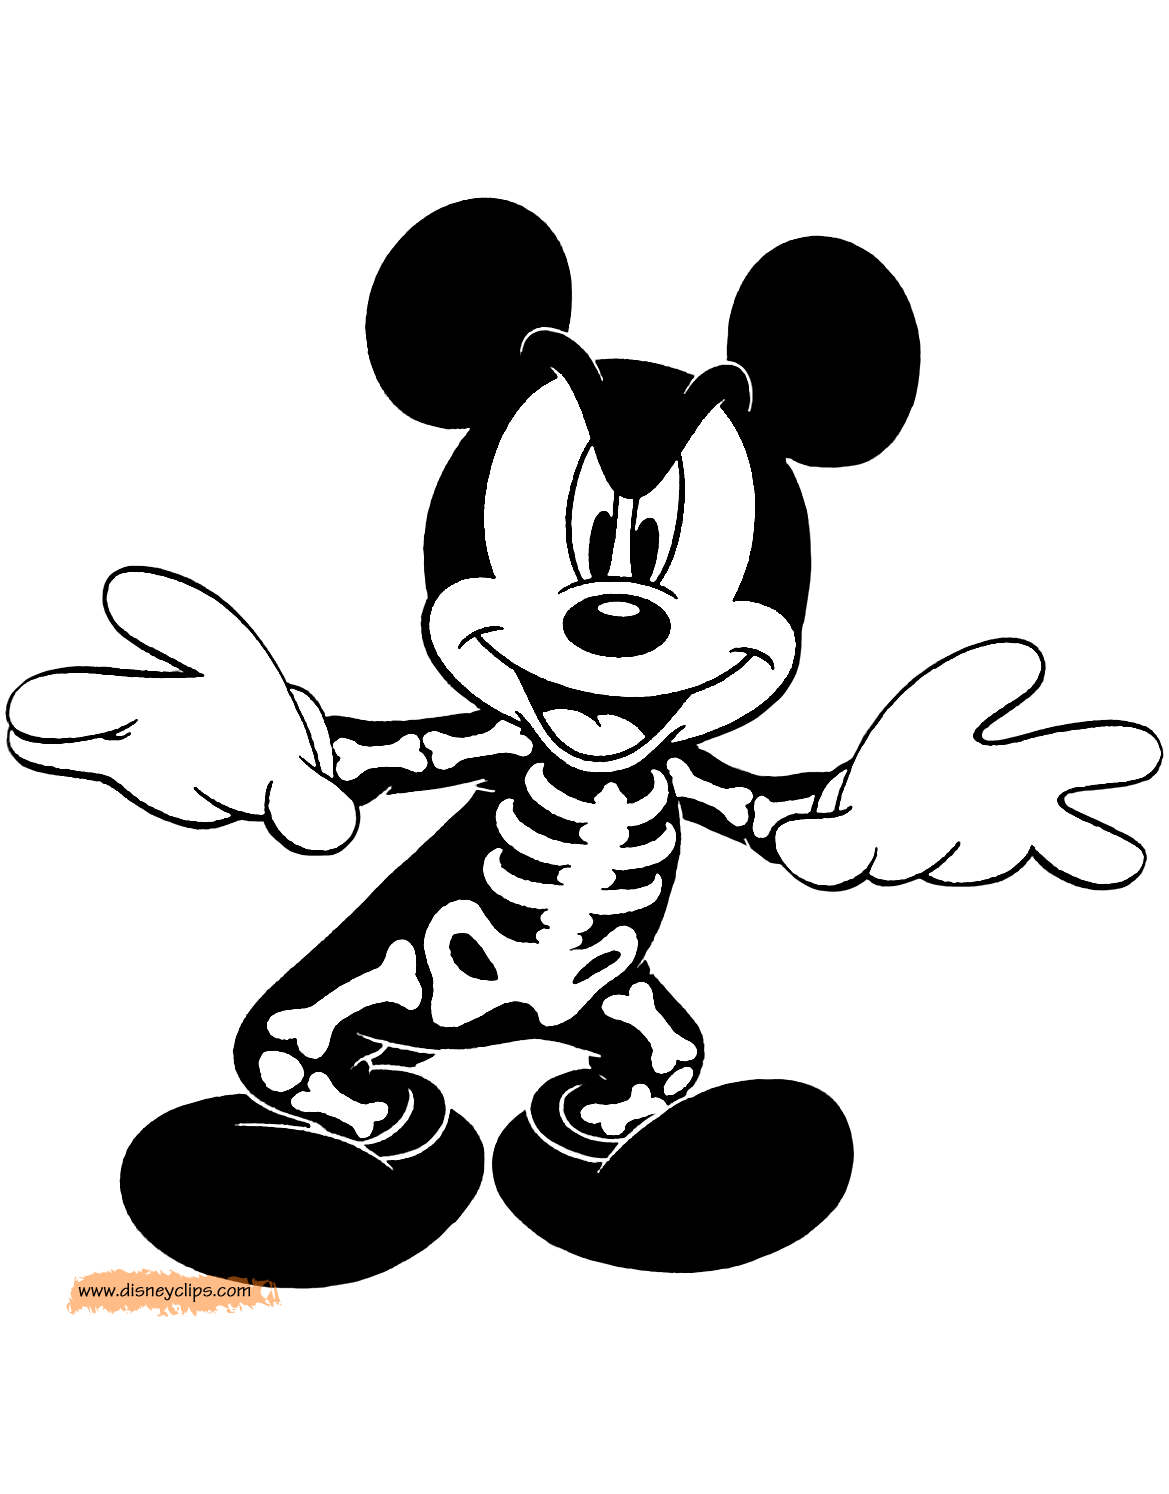 Disney Halloween Printable Coloring Pages.